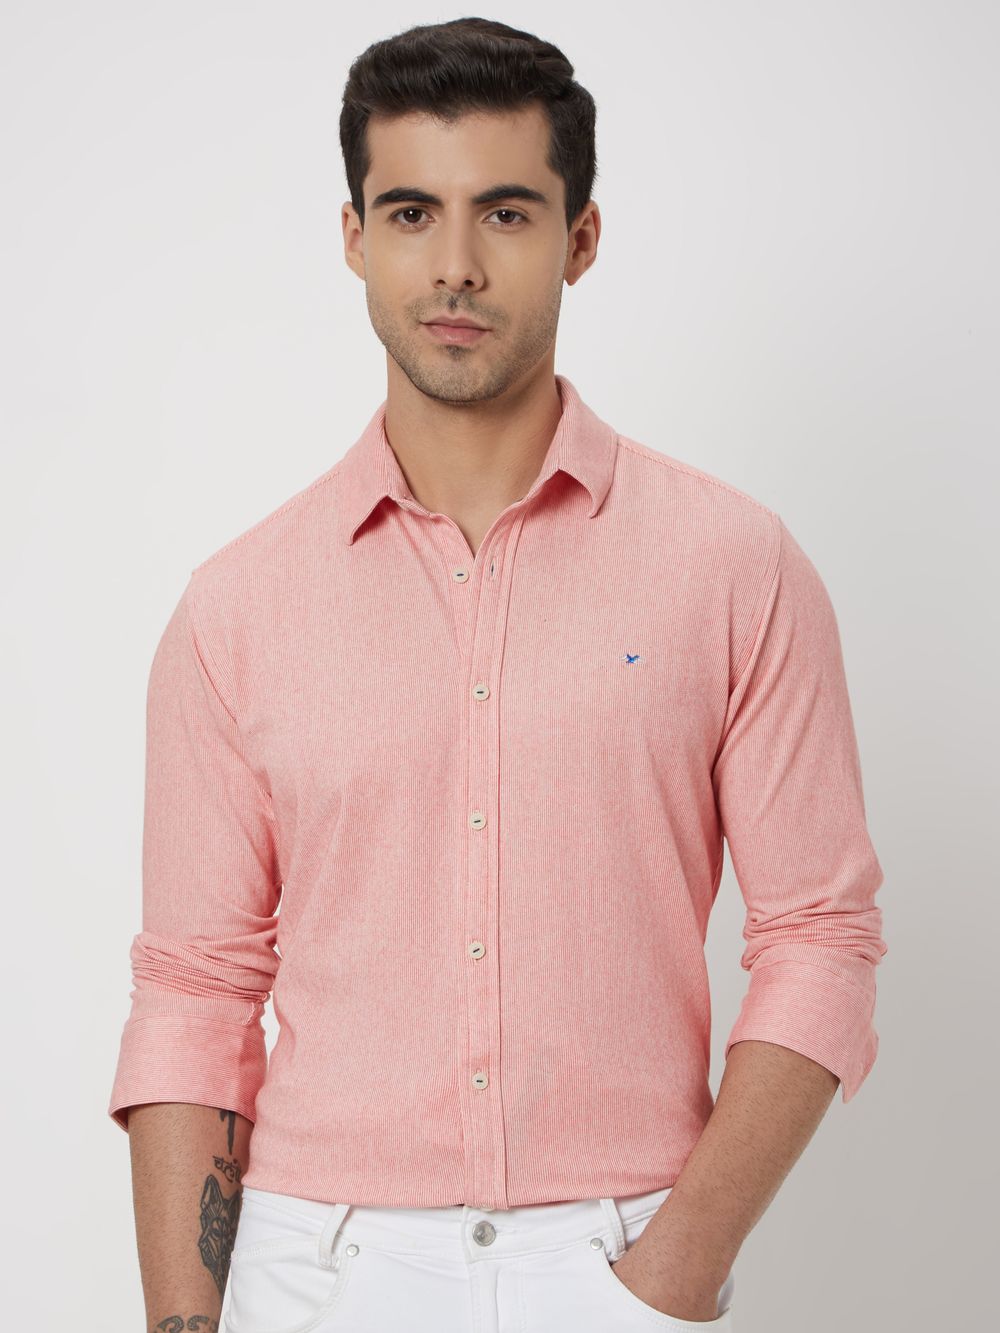 Red & White Pin Stripe Slim Fit Casual Shirt